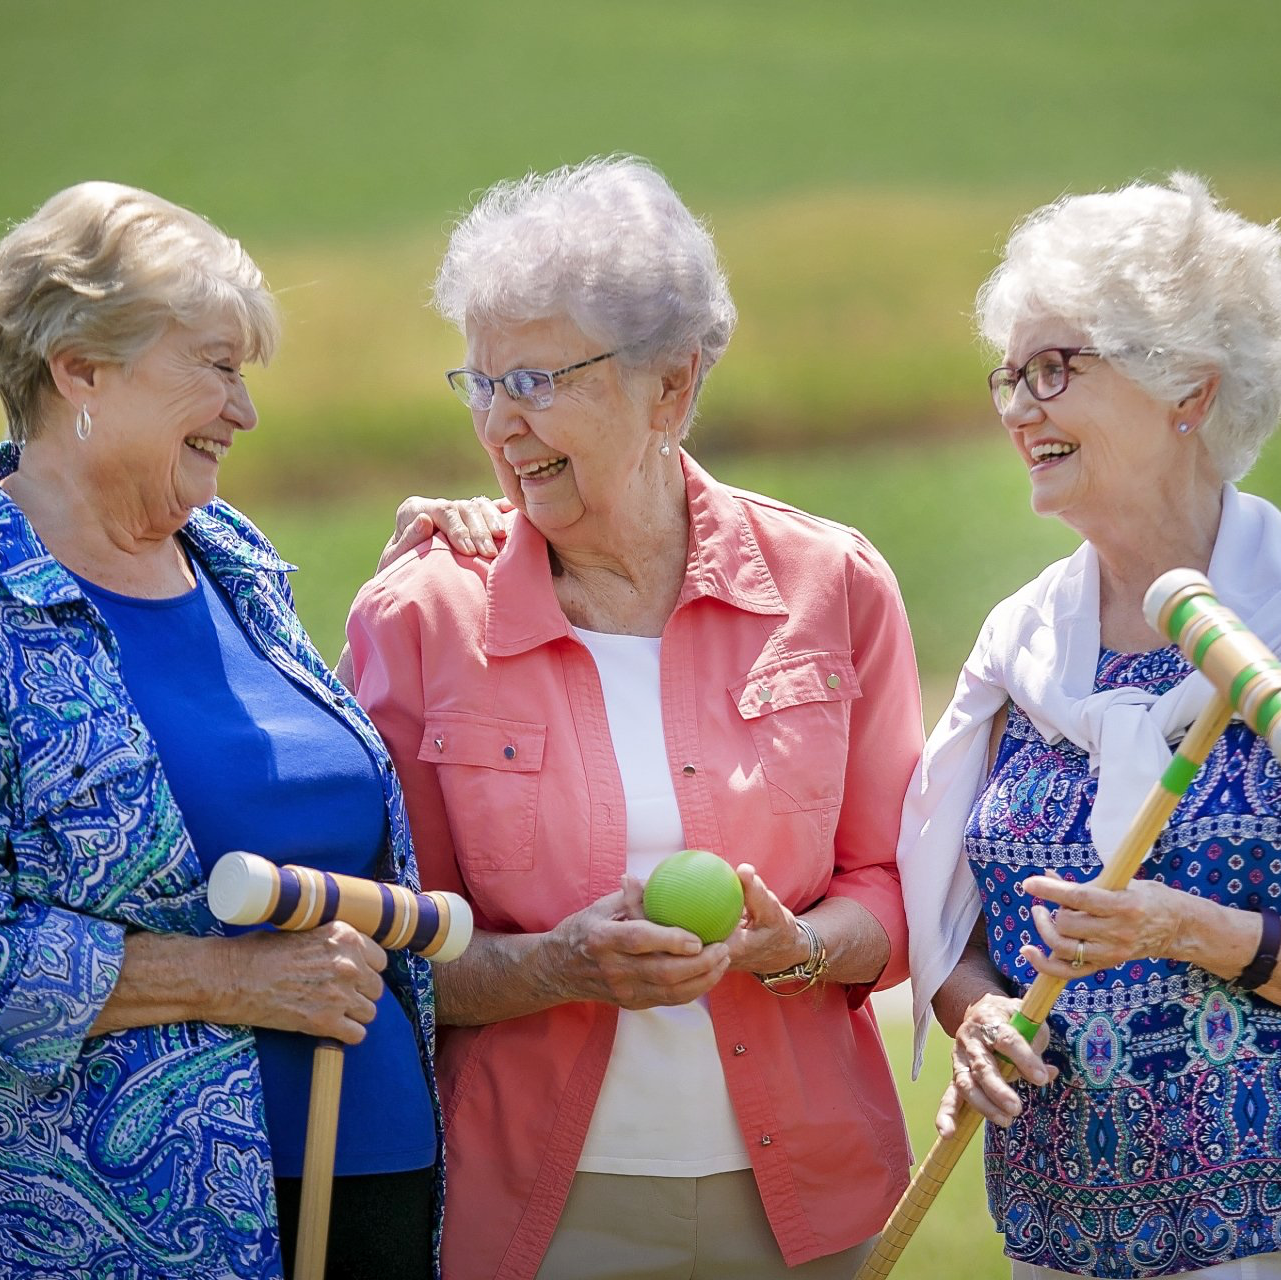 Senior ladies chatting while playing croquet in the Landmark Commons lawn space